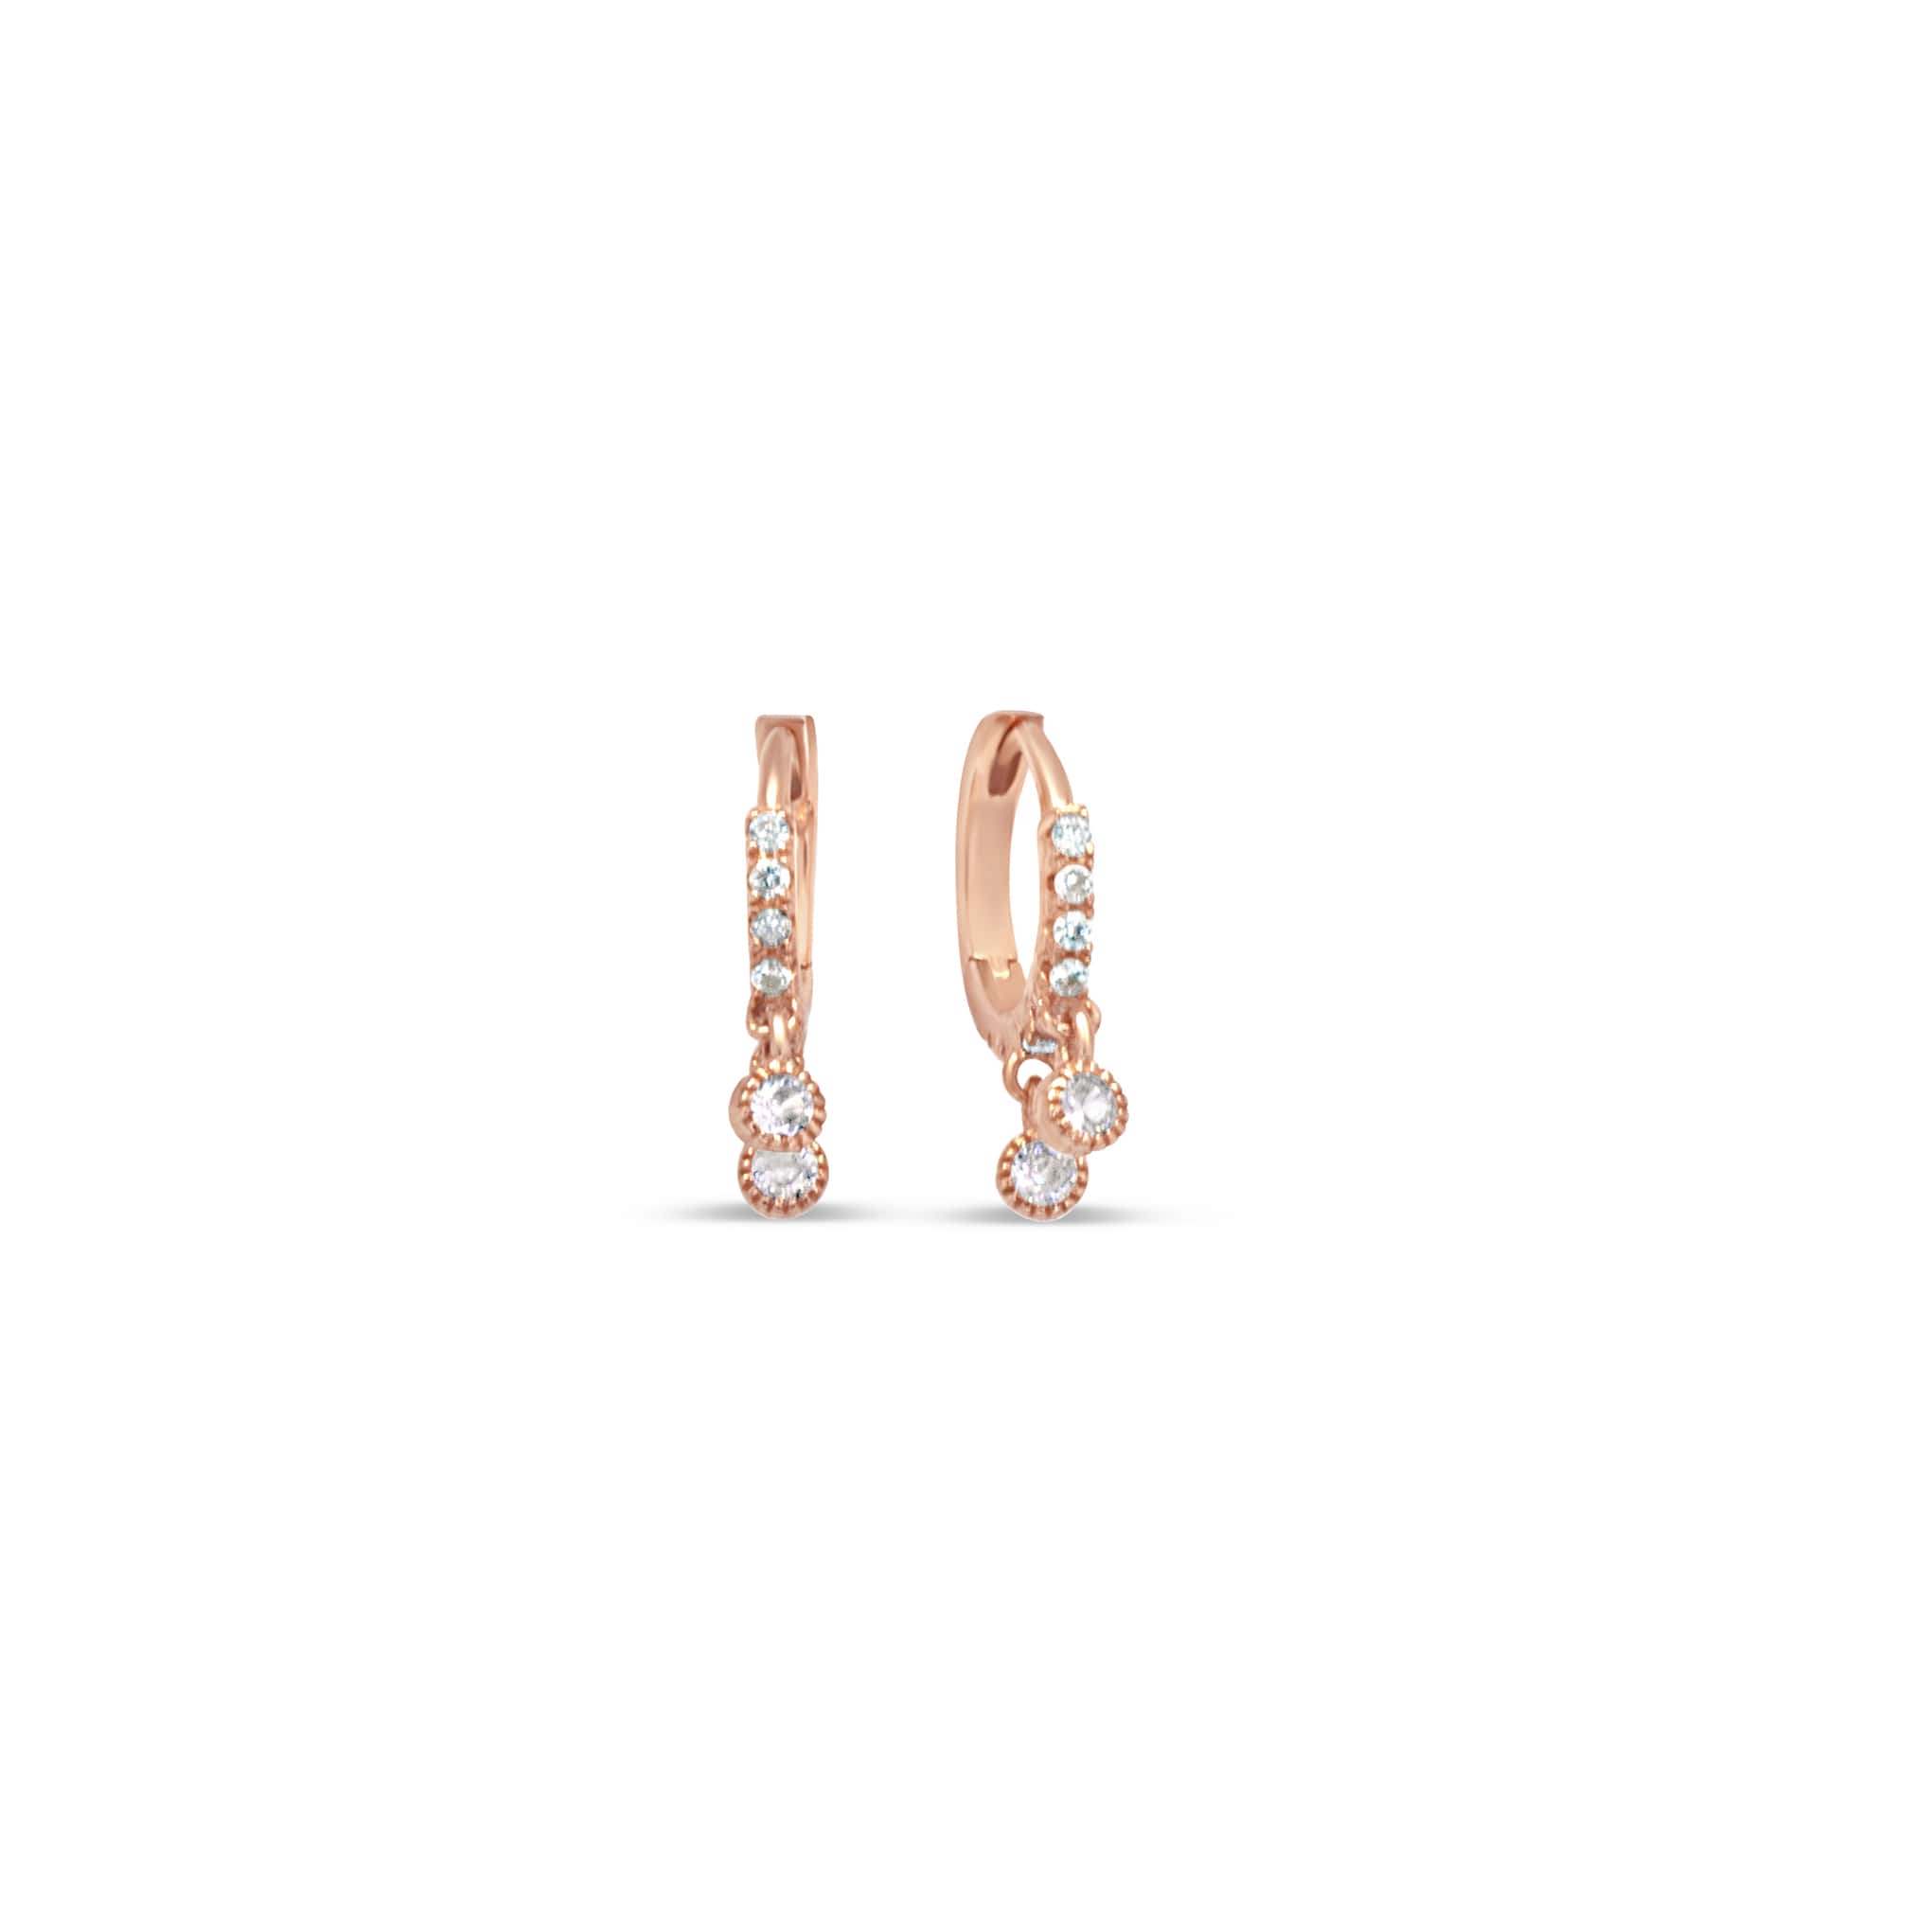 Rose gold huggy earrings with 2 cubic zirconia drops